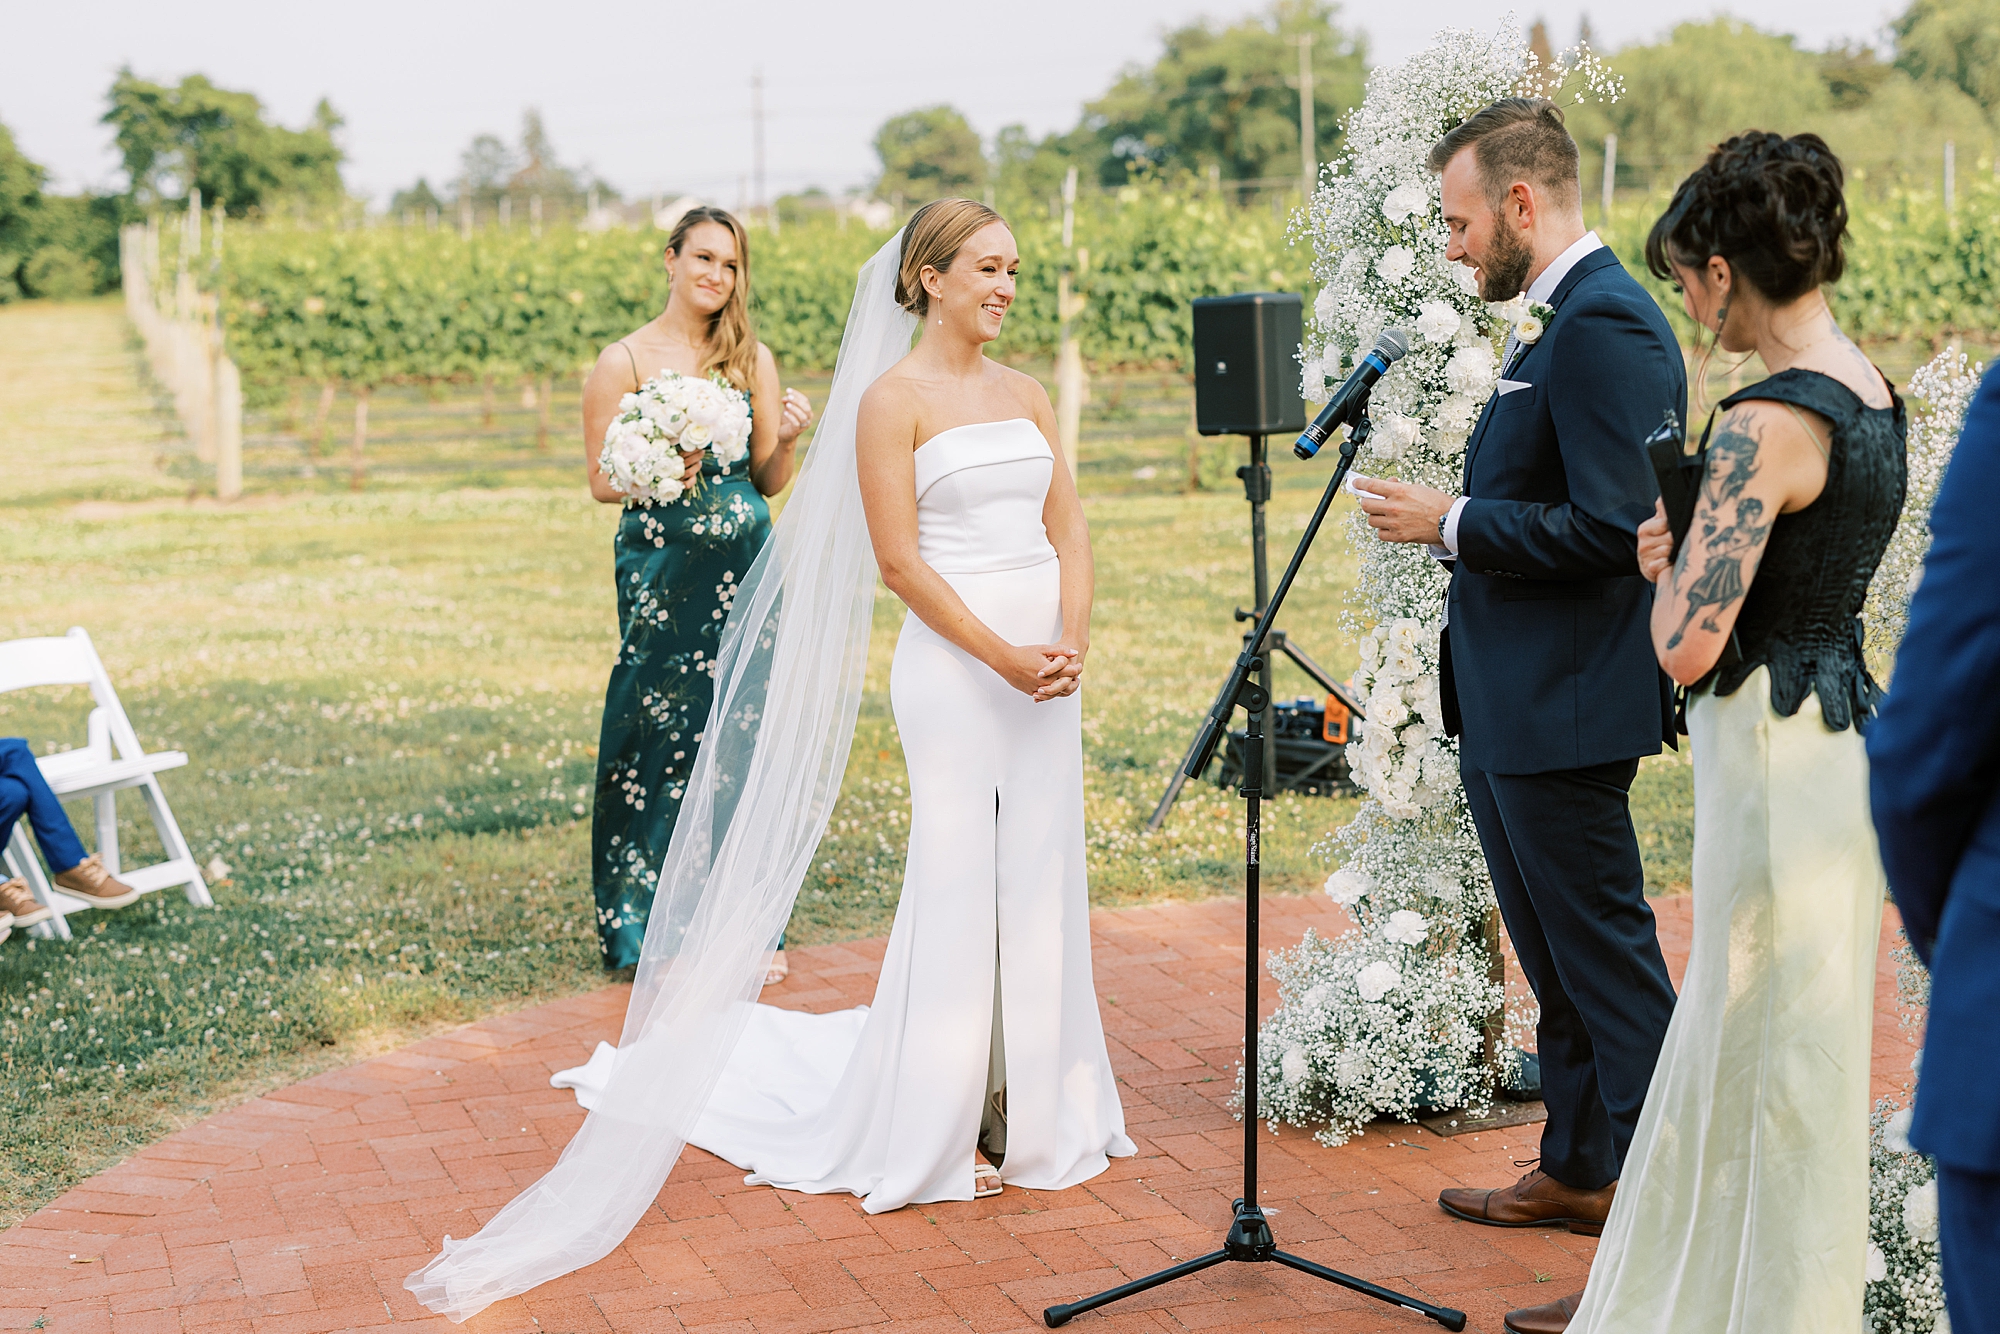 groom reads vows during wedding ceremony at Willow Creek Winery